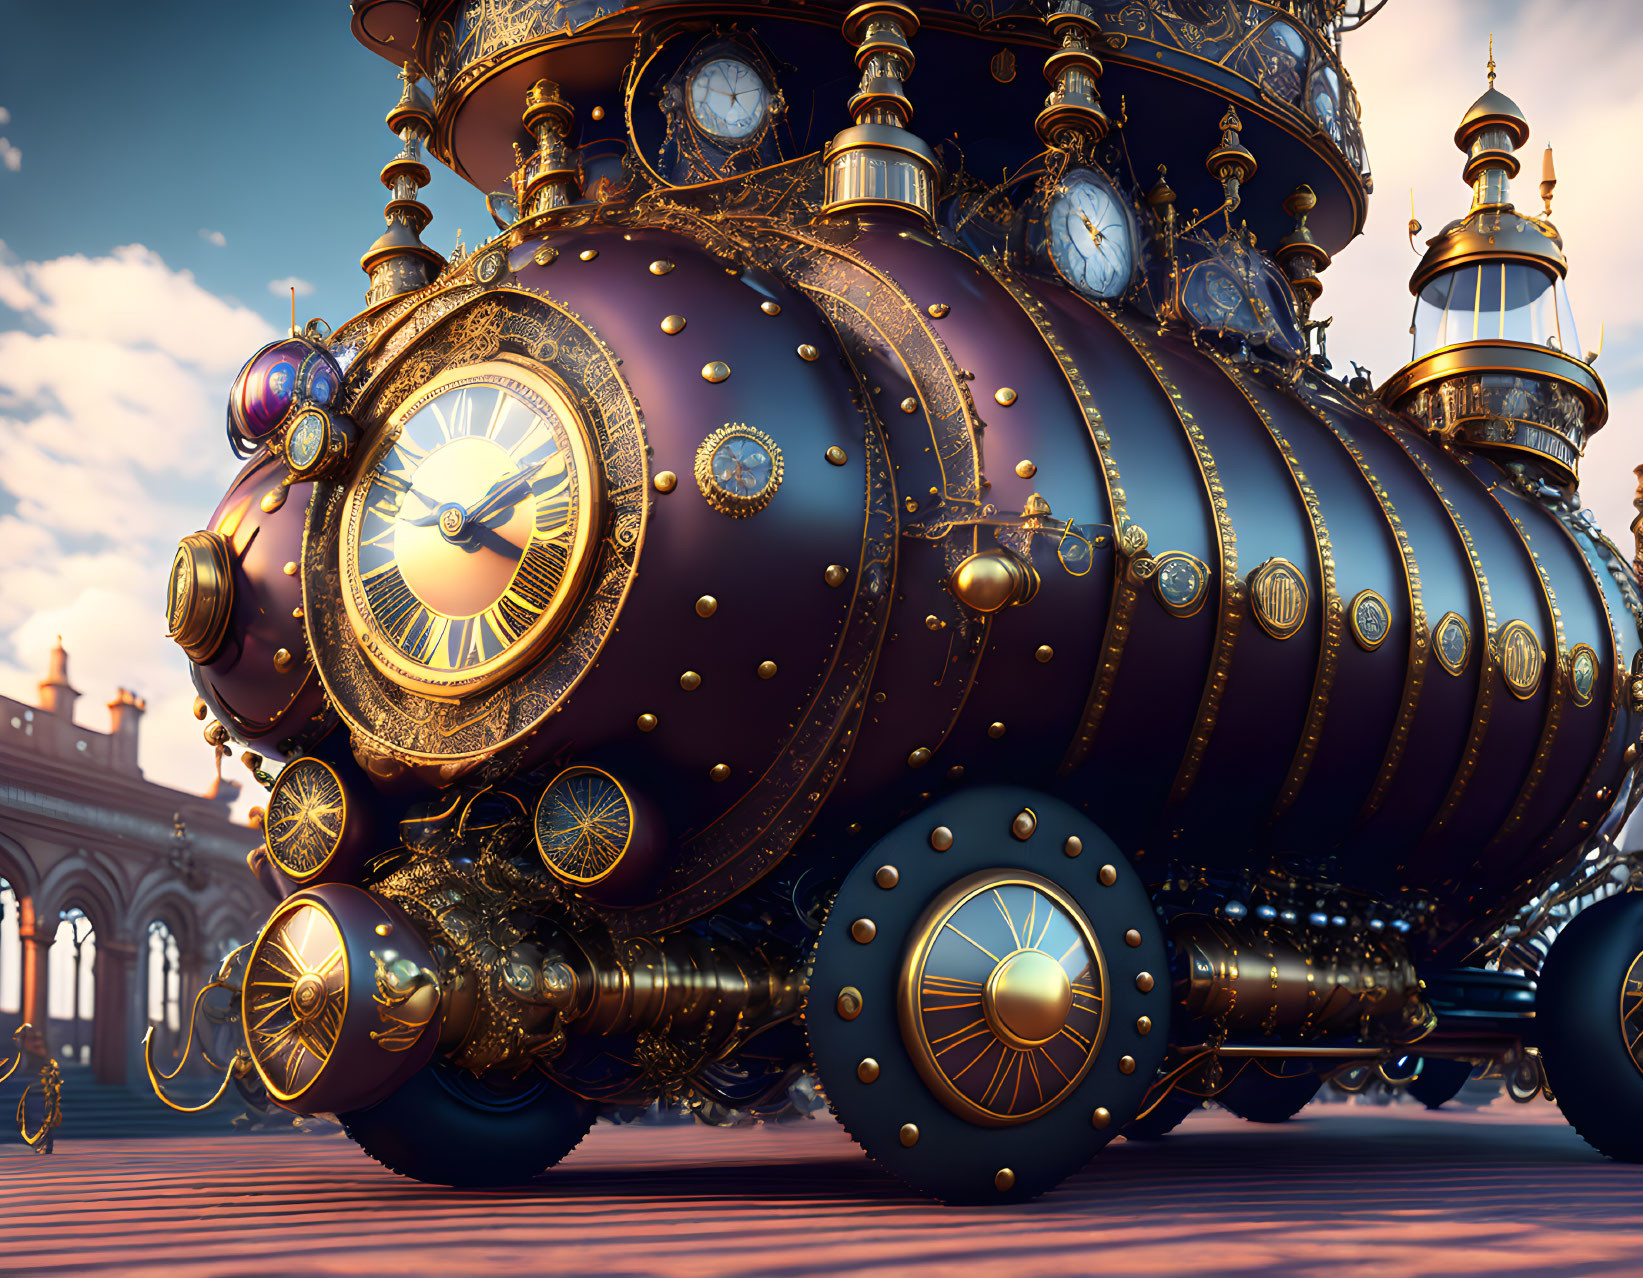 Steampunk locomotive with golden details and clock elements in vintage railway station.